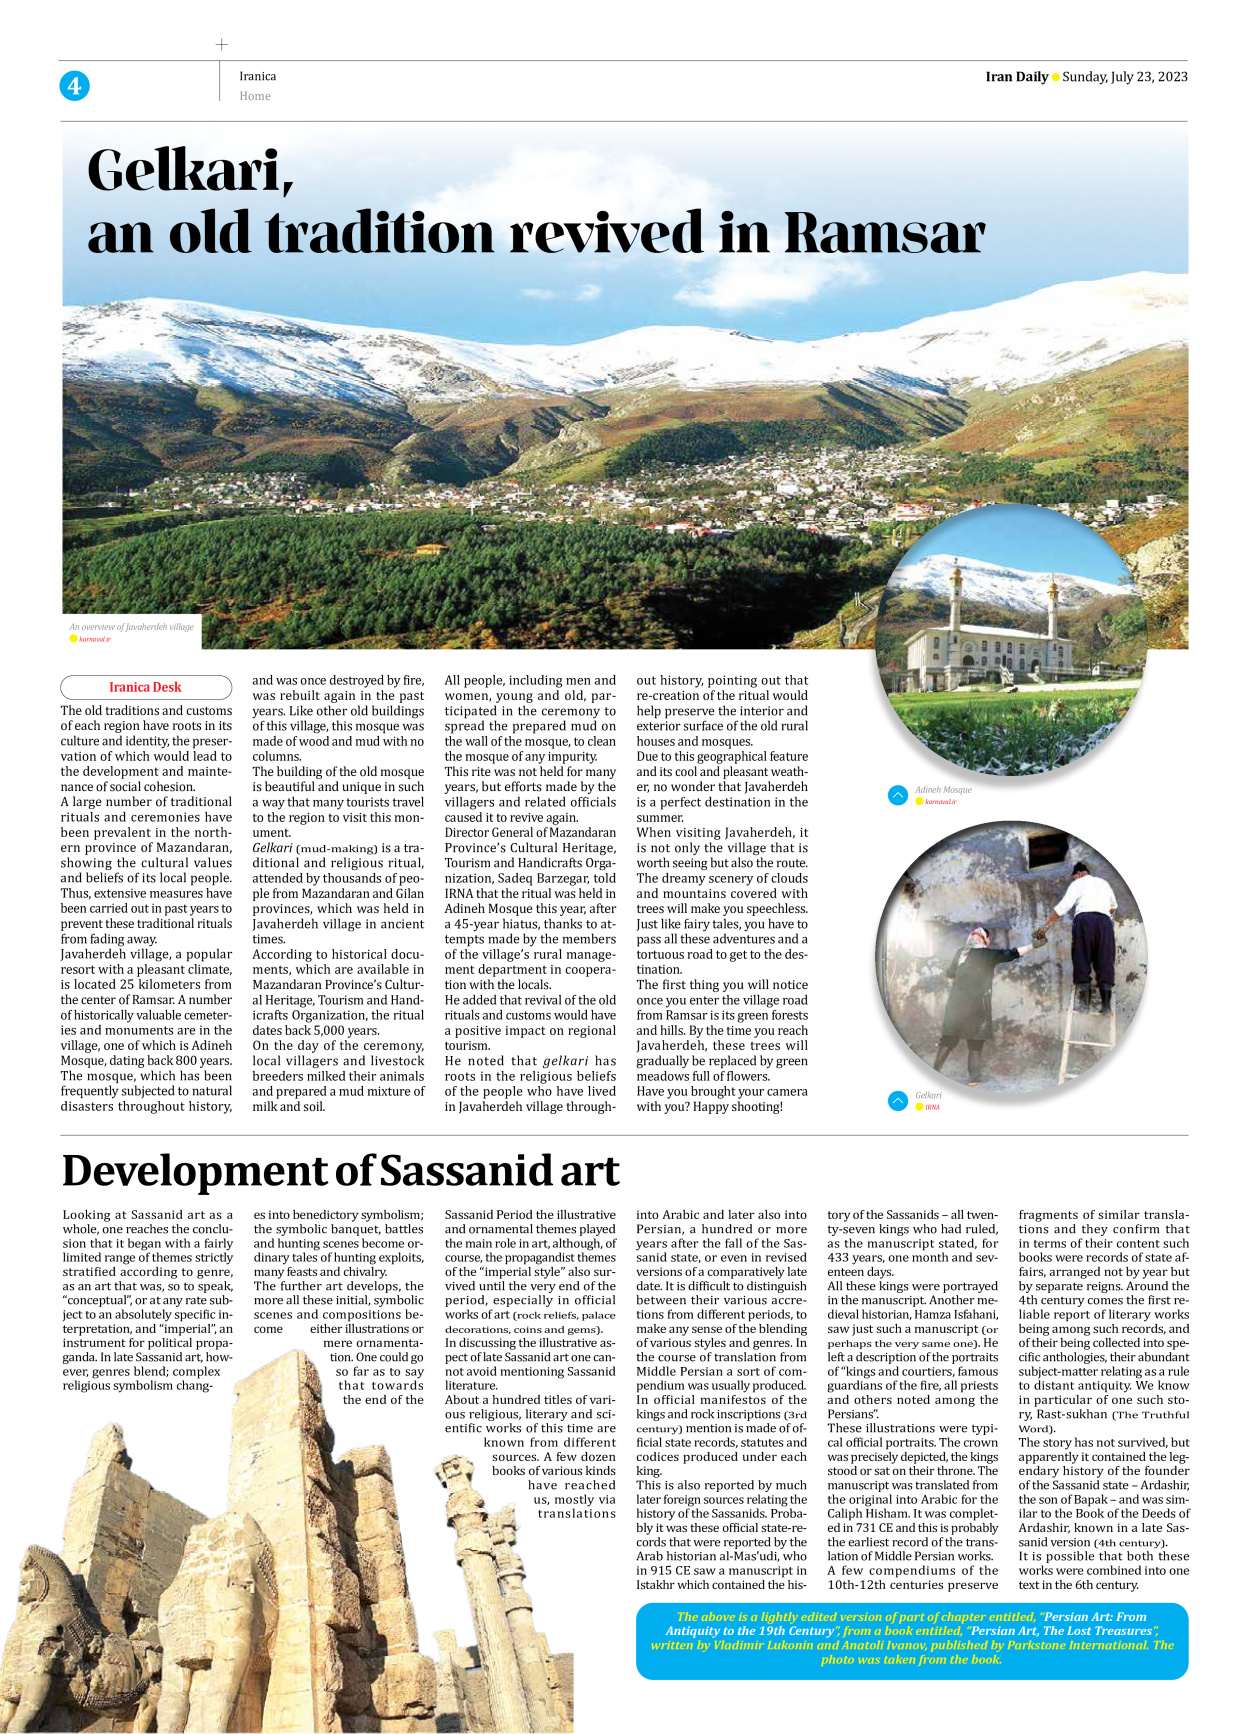 Iran Daily - Number Seven Thousand Three Hundred and Forty Six - 23 July 2023 - Page 4